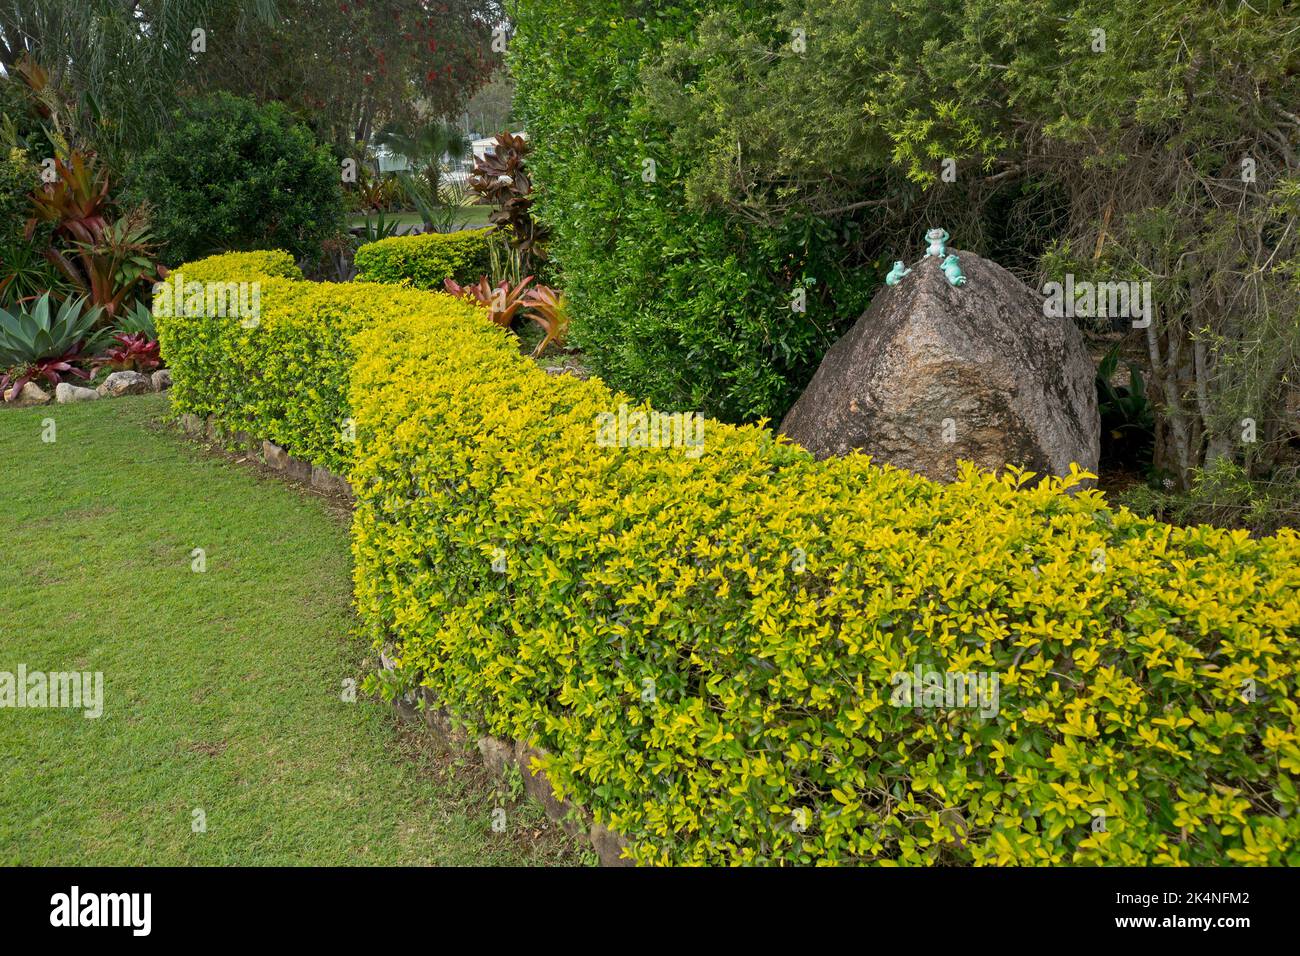 Long curved garden hedge created with evergreen shrub Duranta repens 'Sheena's Gold', a poisonous plant, in Australia Stock Photo